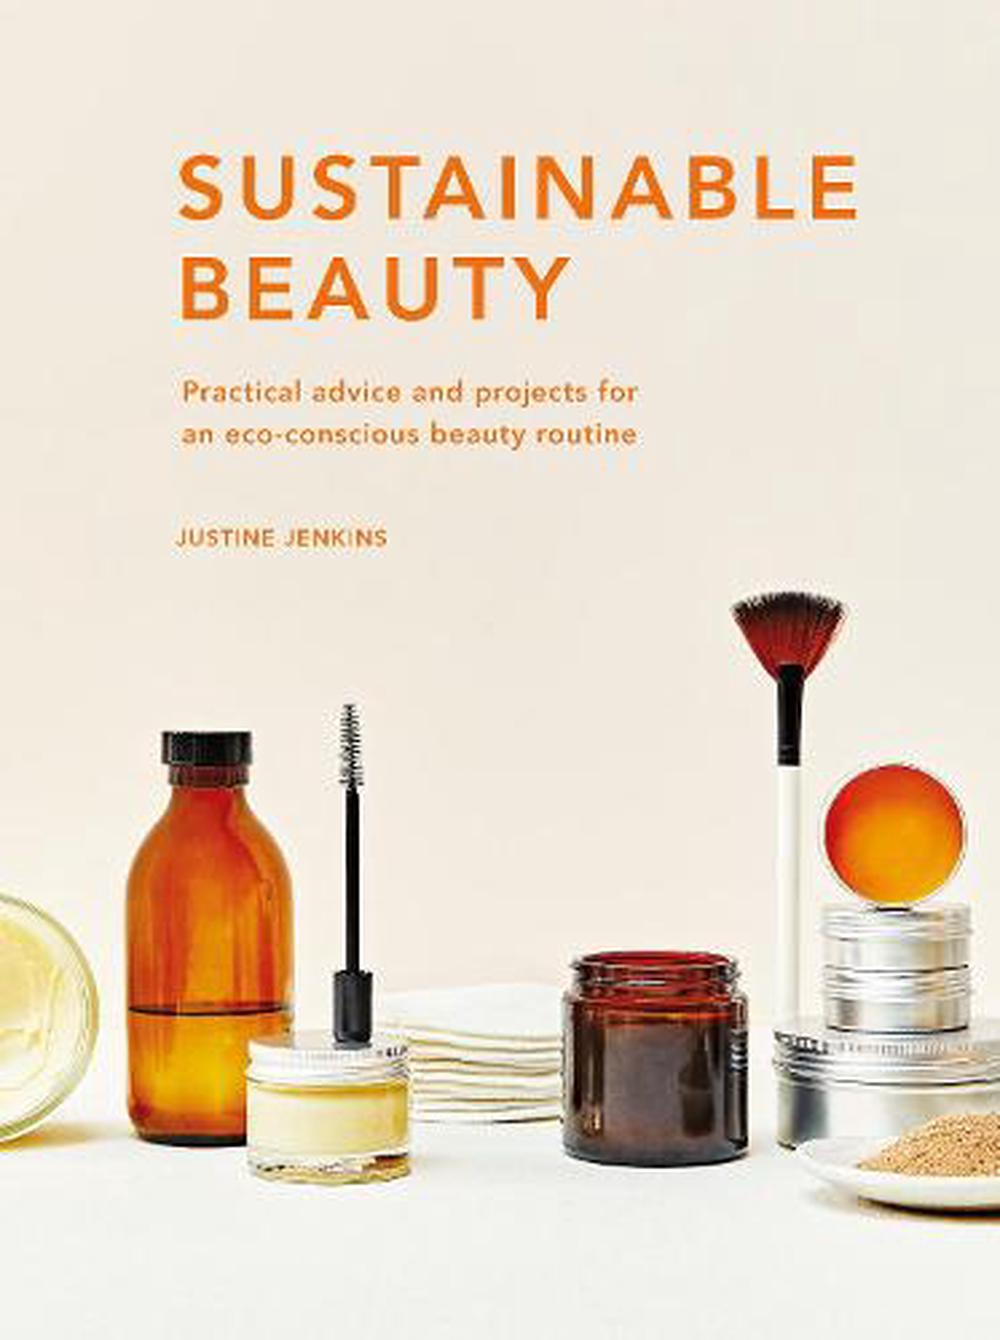 Book - Sustainable Beauty by Justine Jenkins